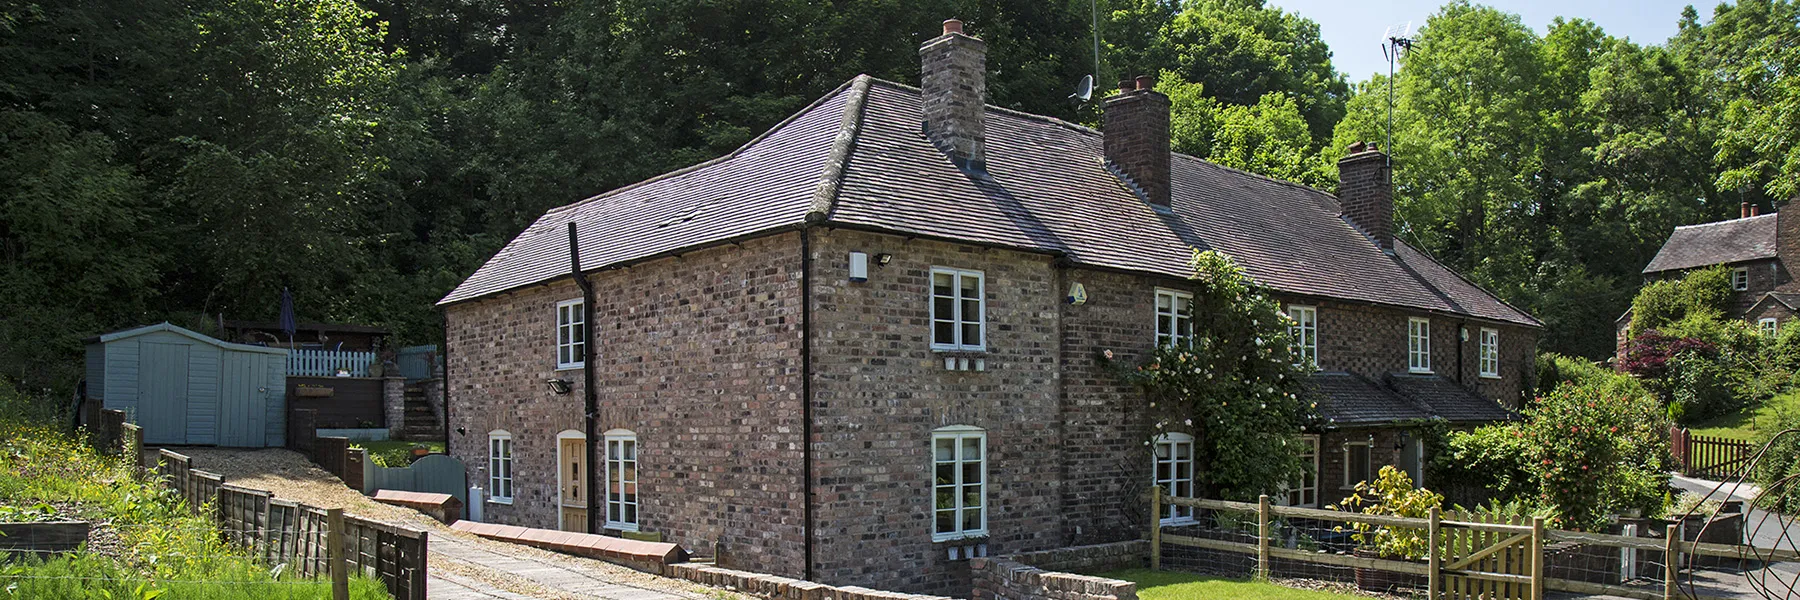 Exterior shot of Puddle Duck Cottages